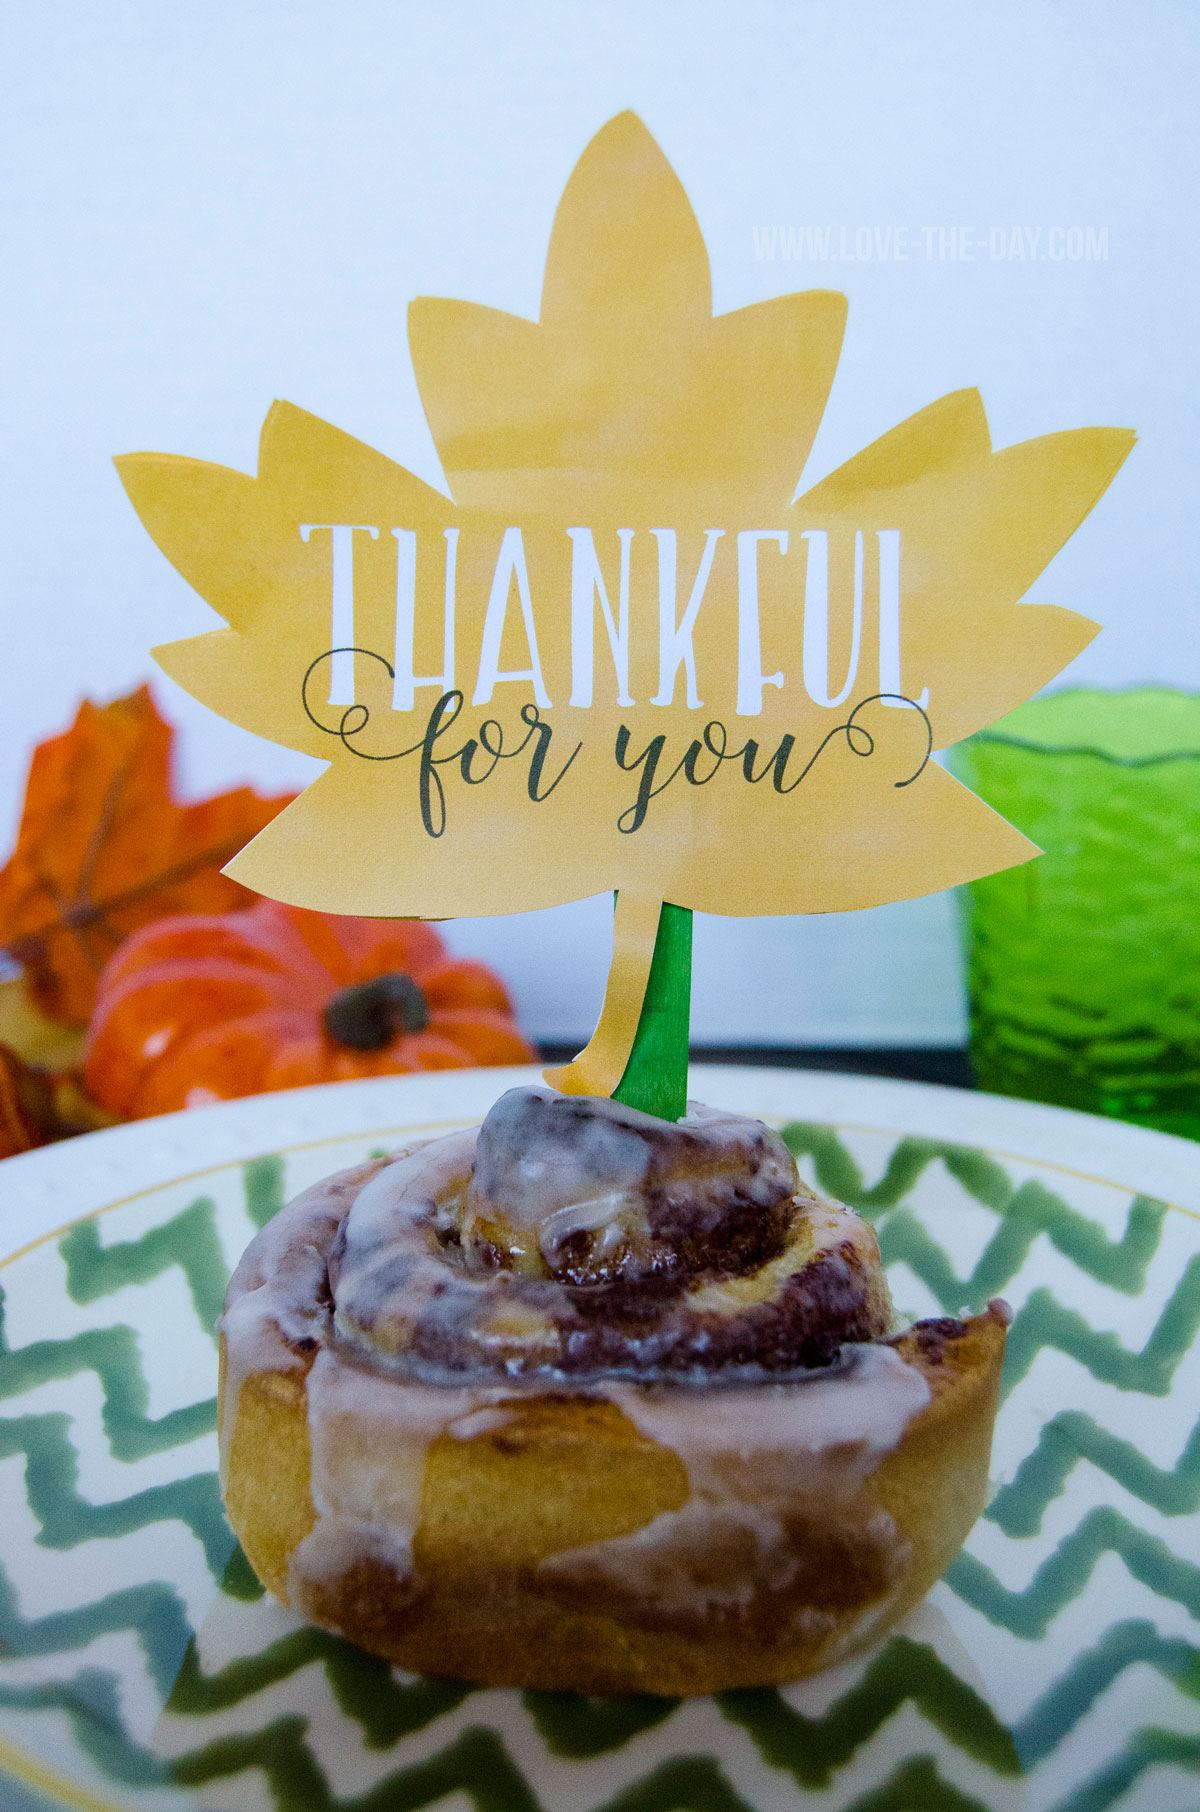 FREE ‘Thankful For You’ Leaf Printable by Love The Day